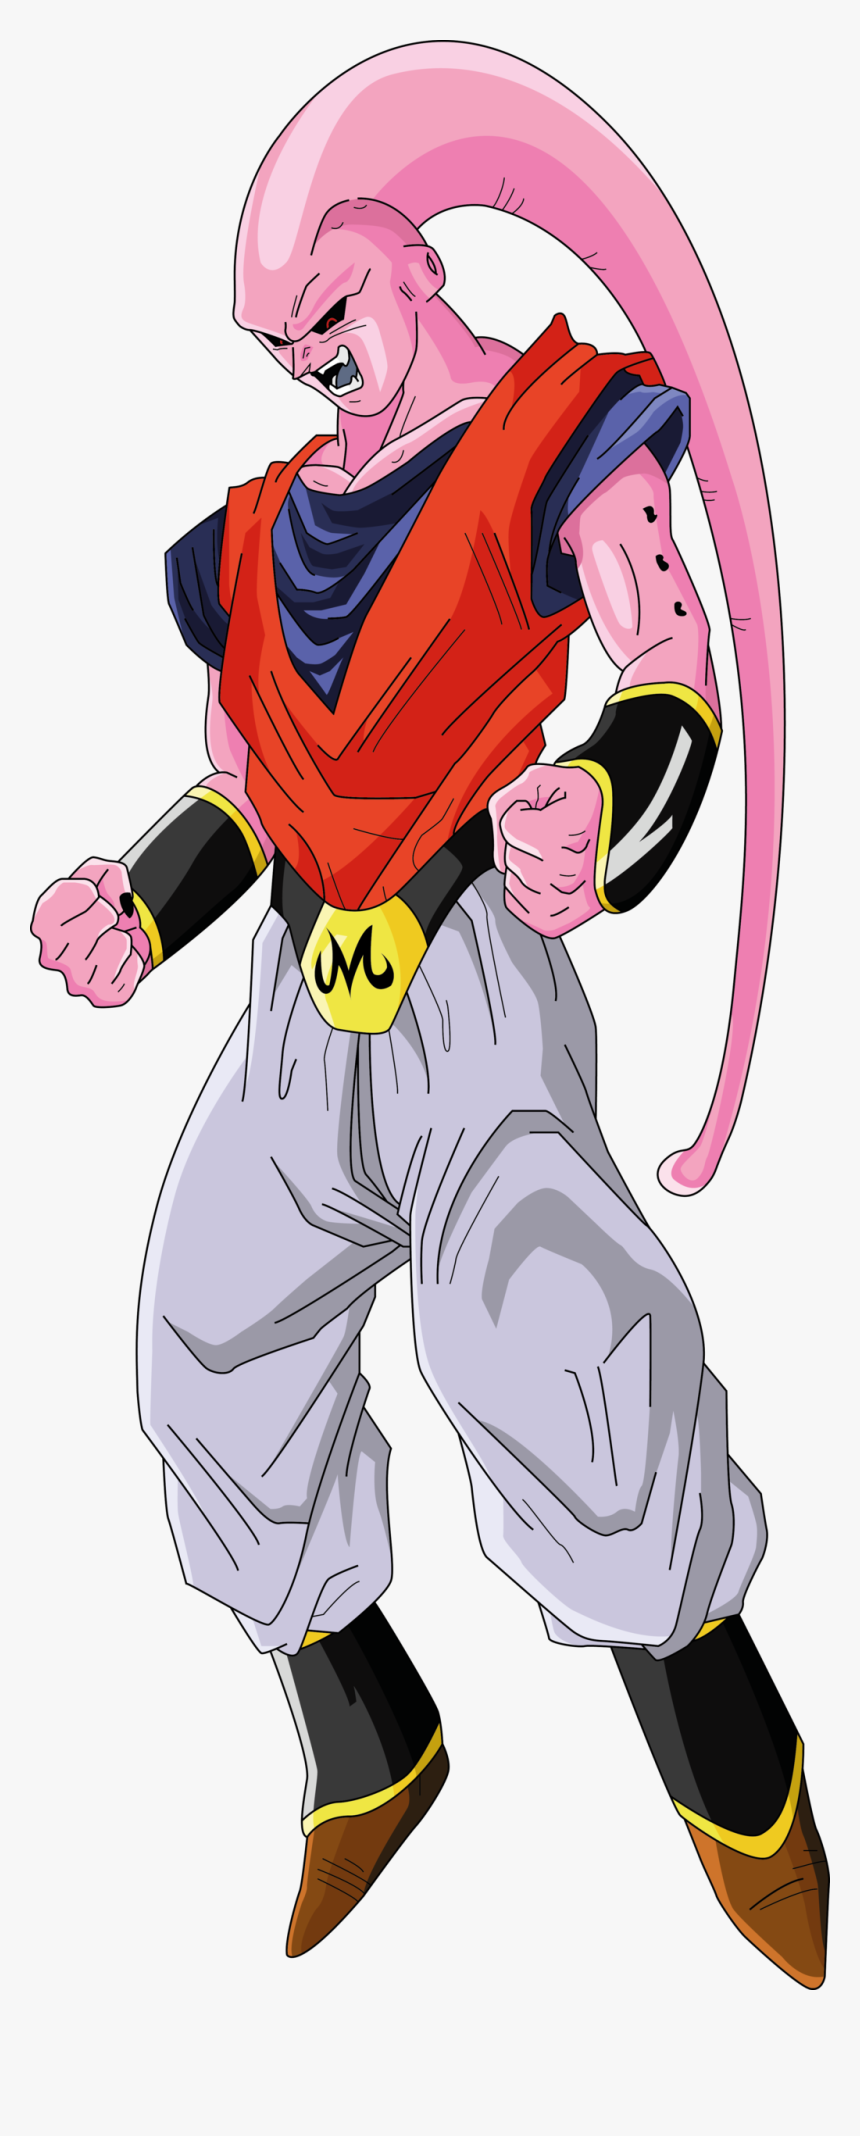 Super Buu Kind Of Has To Be Stronger, Since He"s Kid, HD Png Download, Free Download